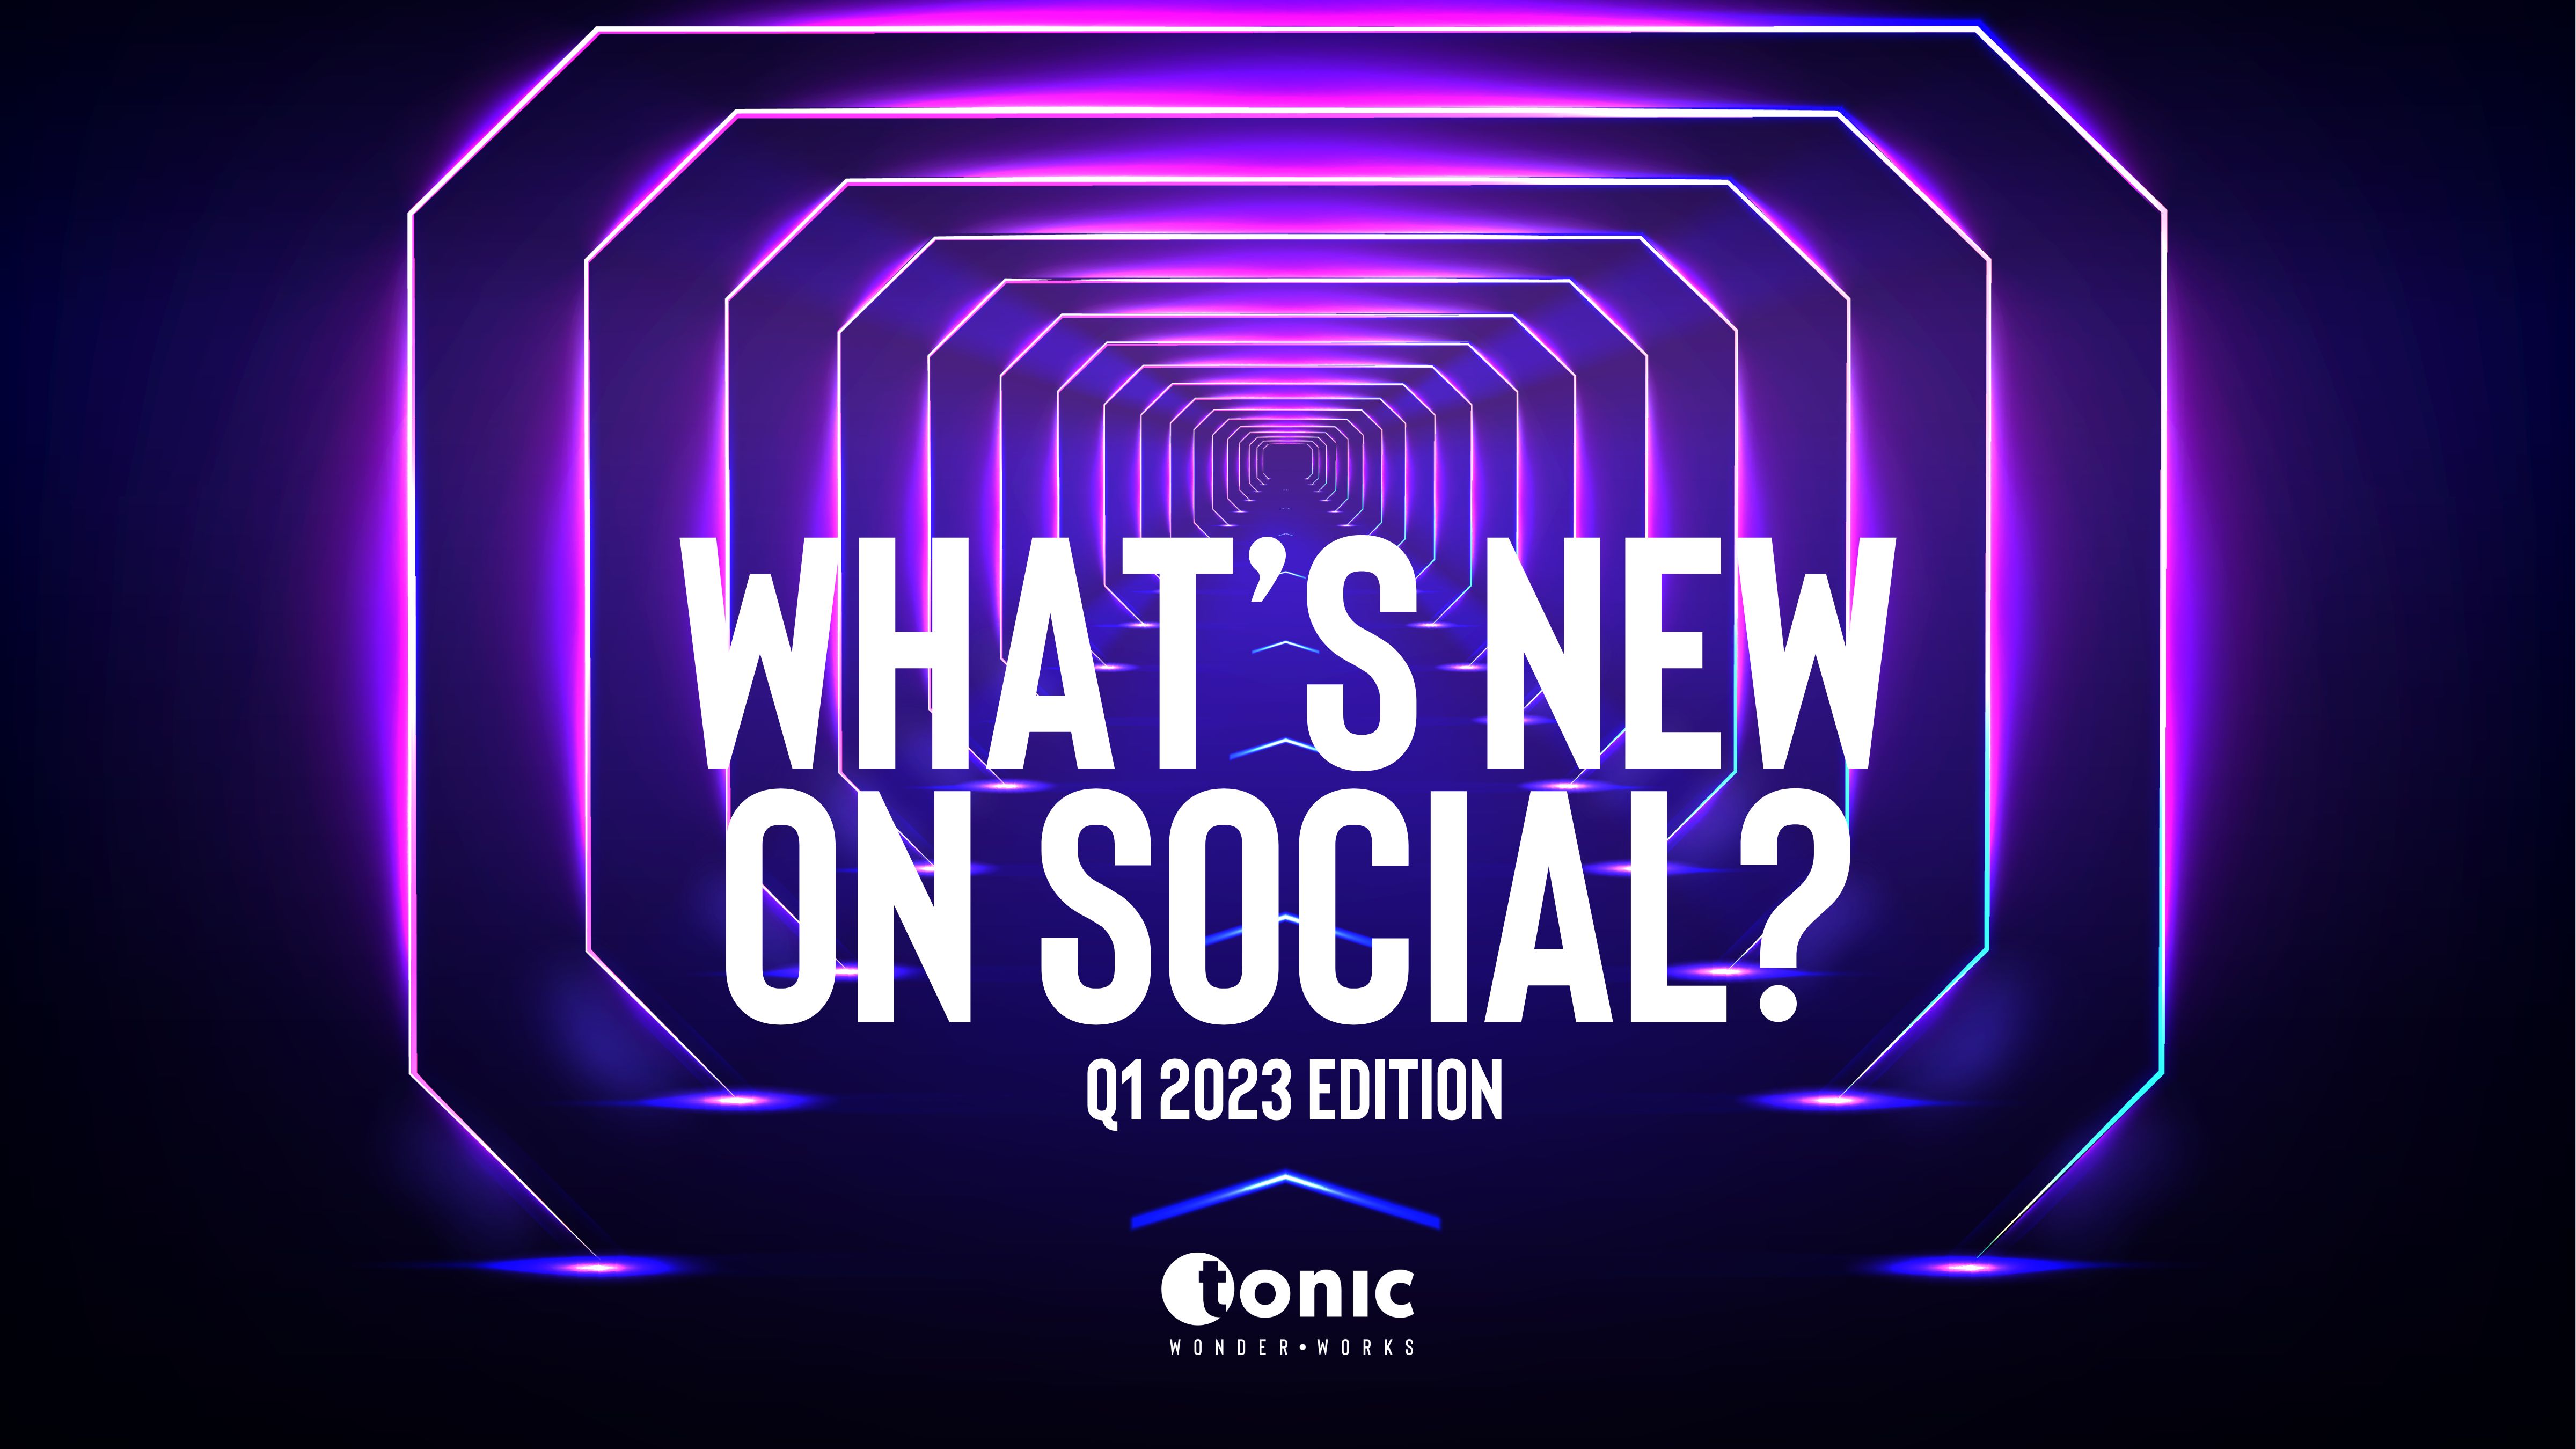 What’s Coming On Social Media?